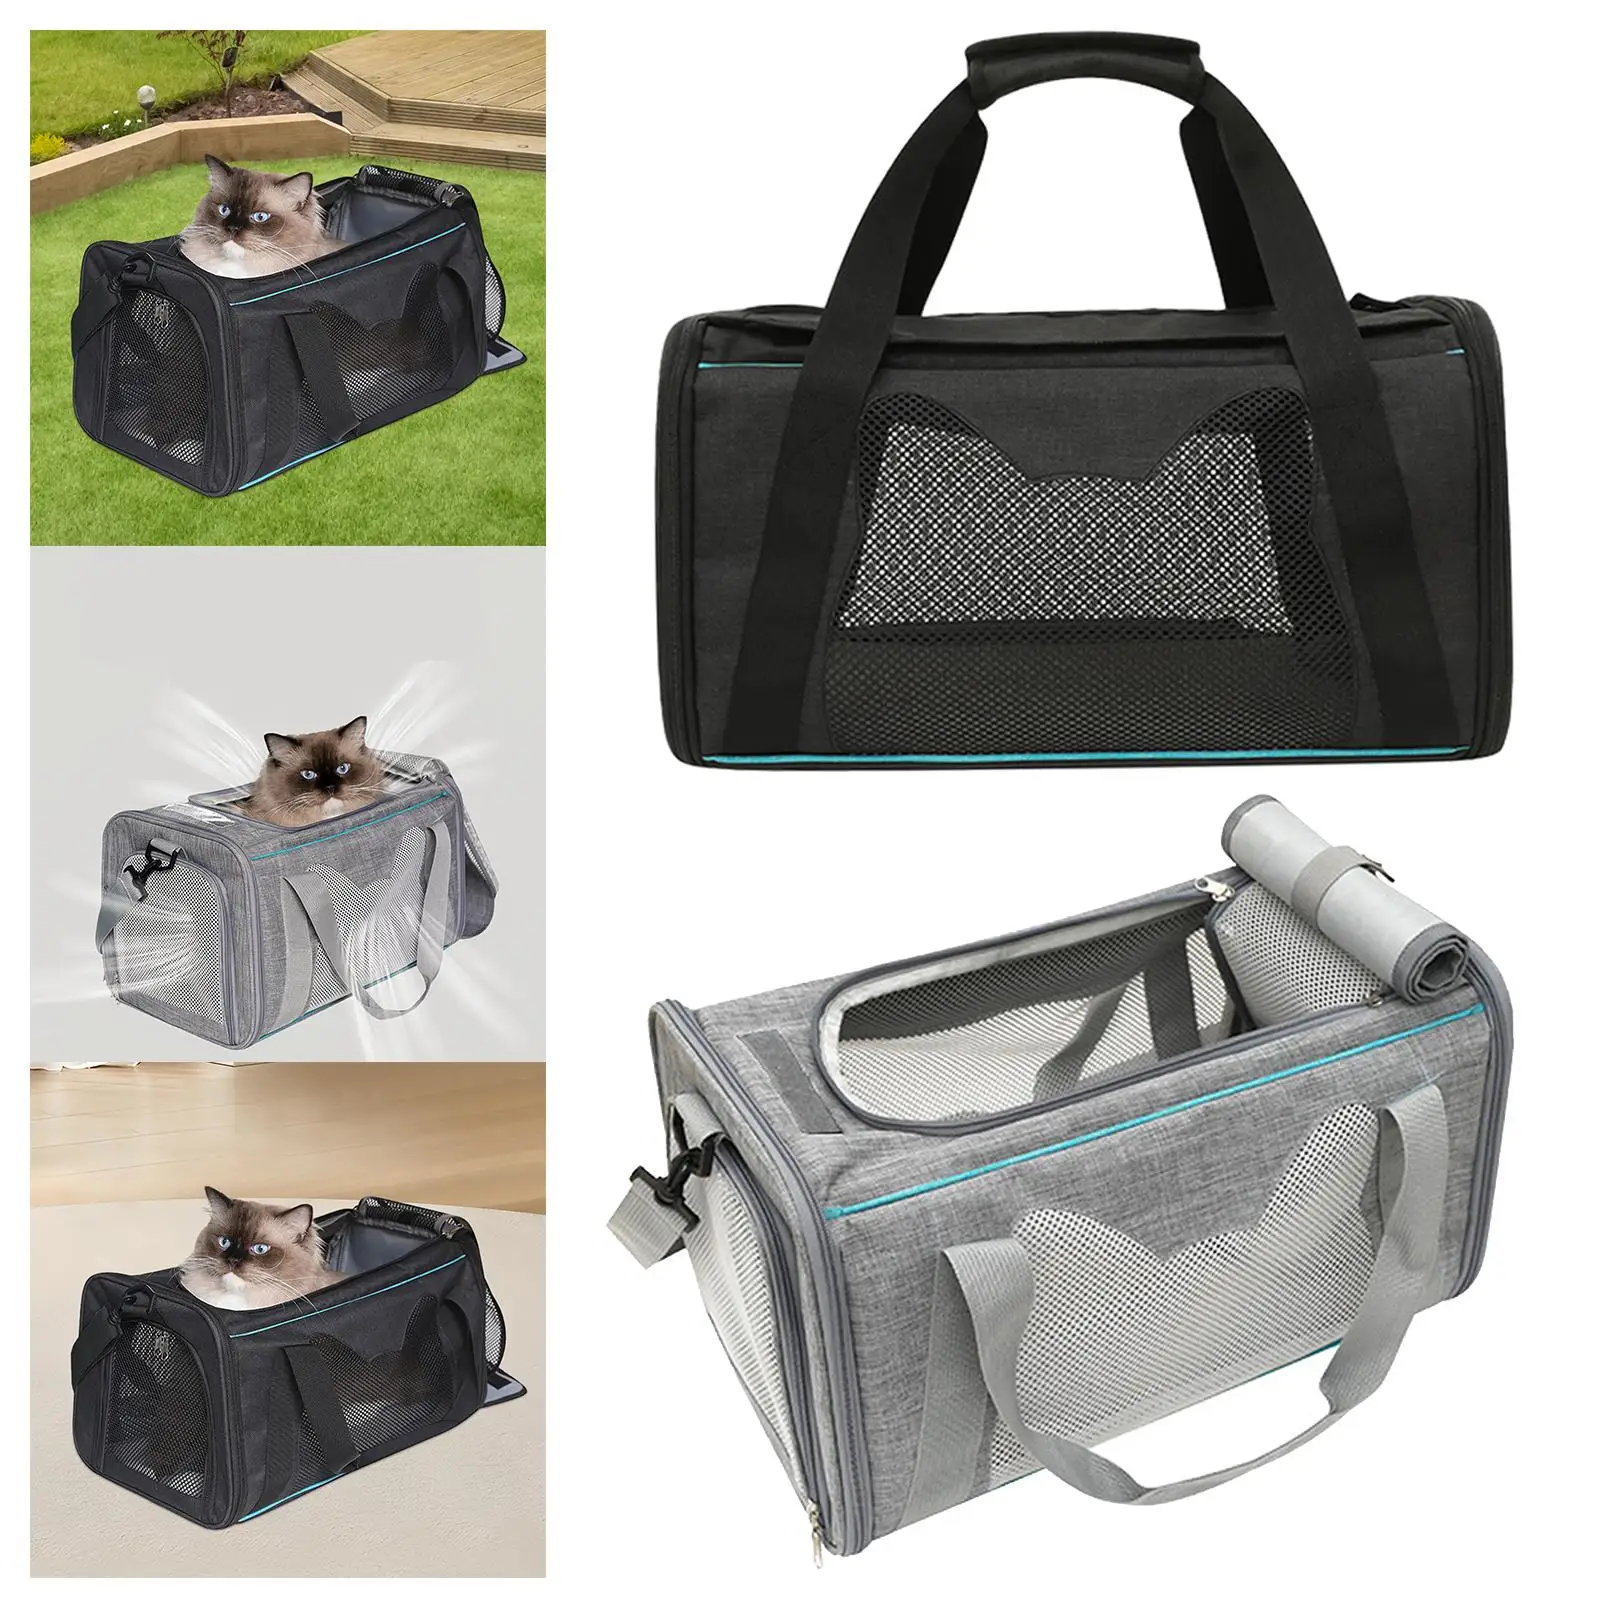 Cat Travel Carrier Pet Carrier Small Dogs Outdoor Carrier Mesh Top and Sides for Small Medium Cats Pet Small Dogs Outdoor